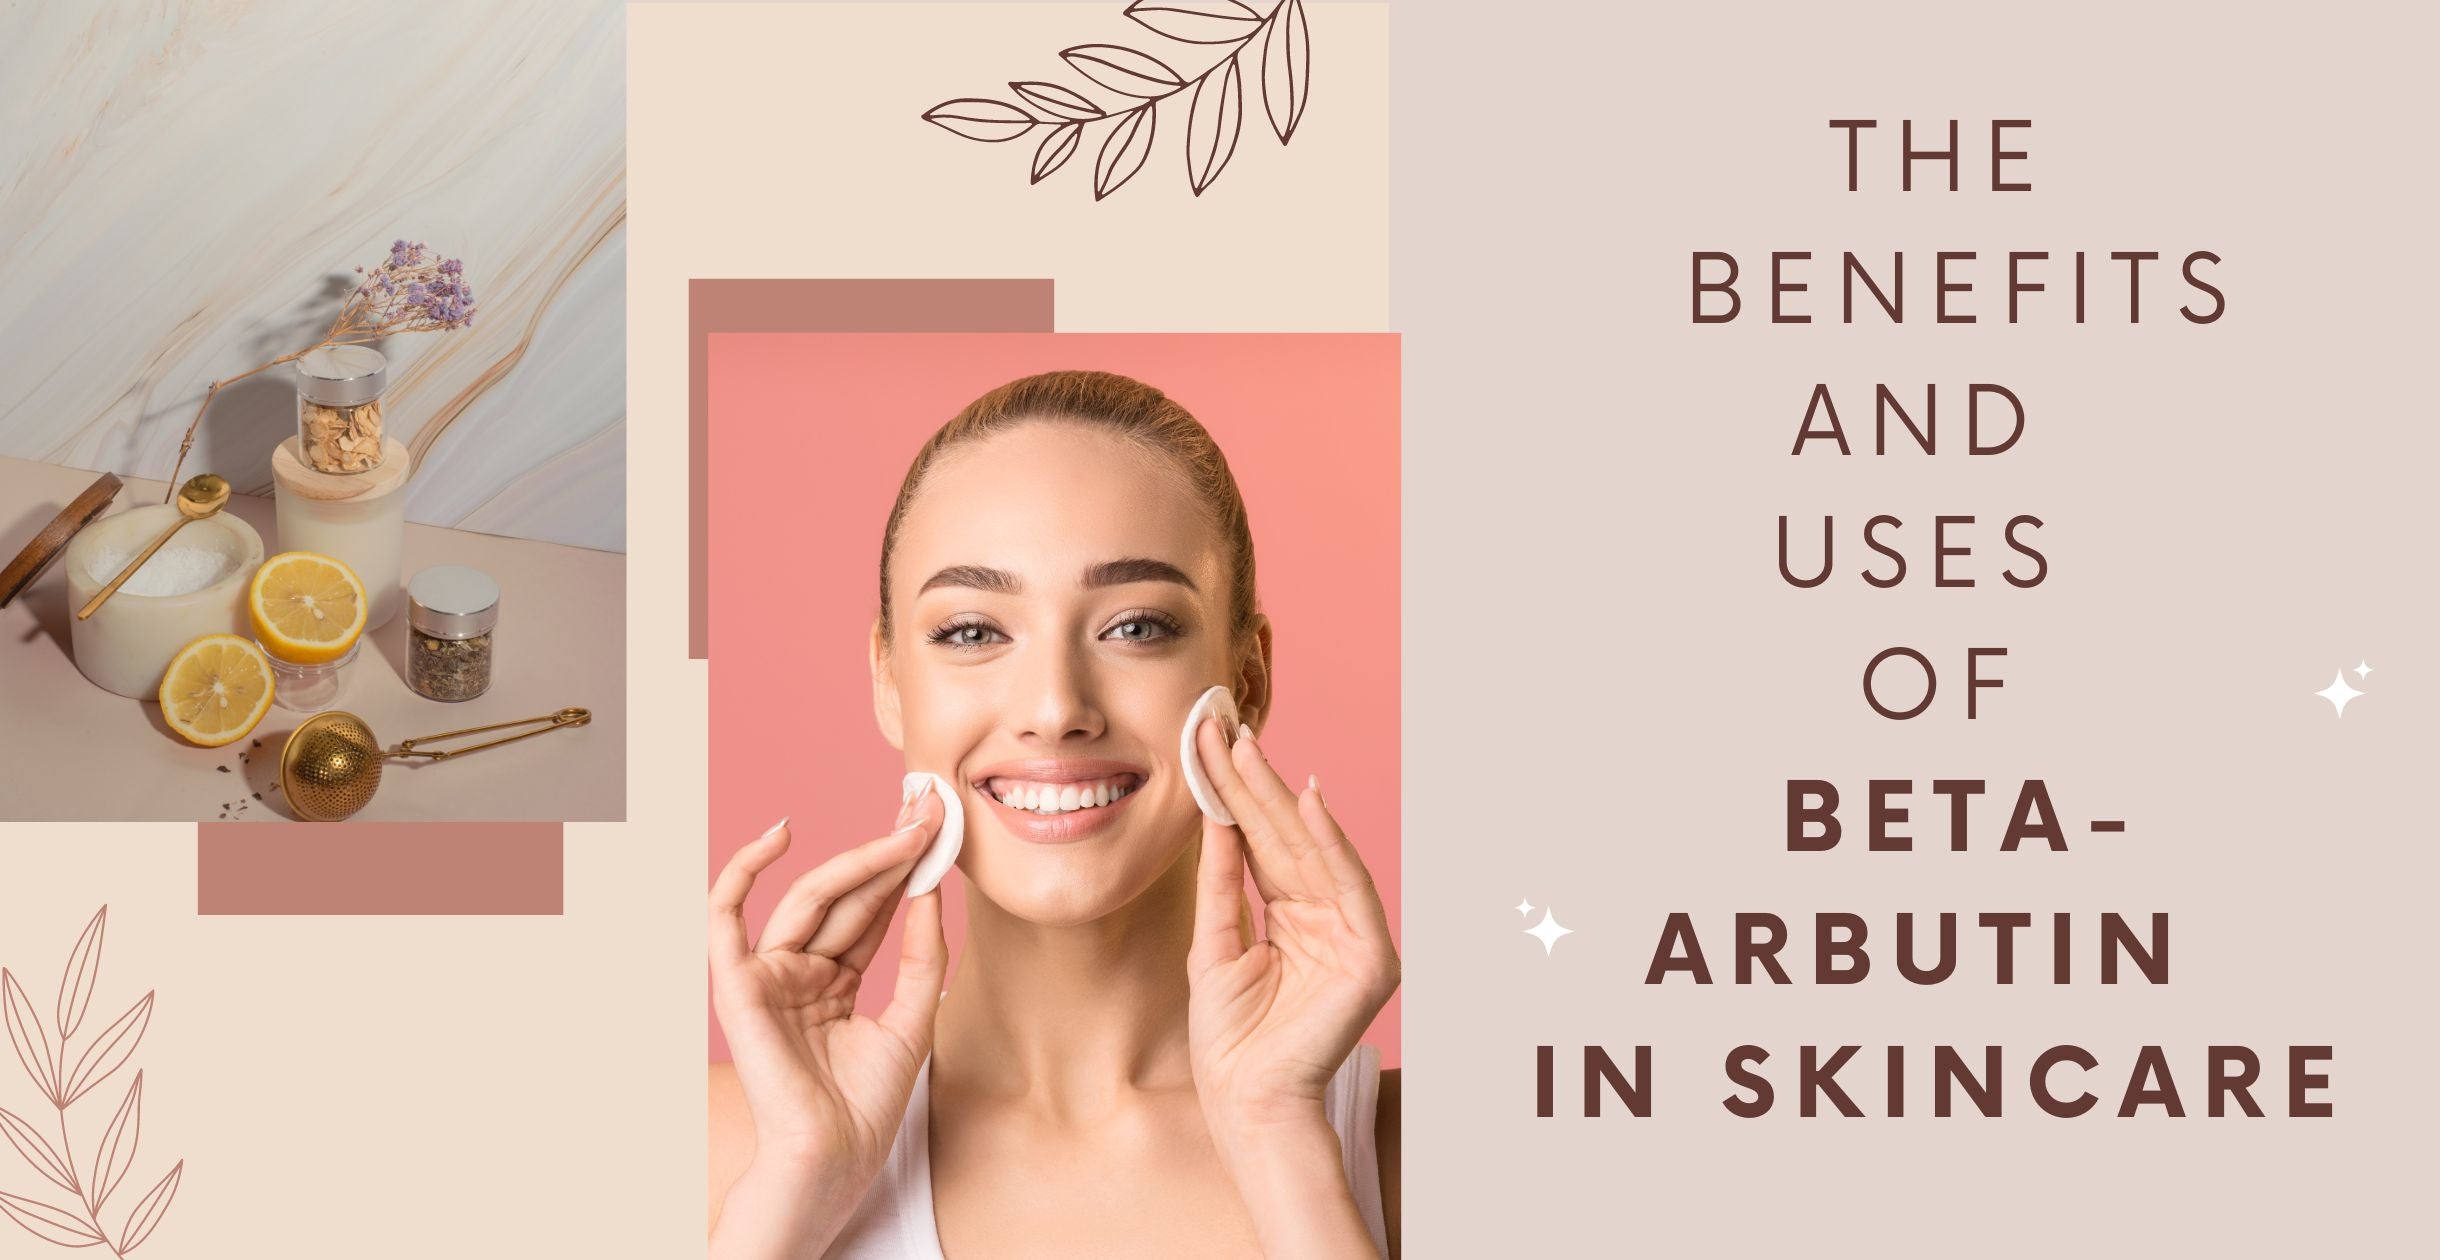 The Benefits and Uses of Beta-Arbutin in Skincare